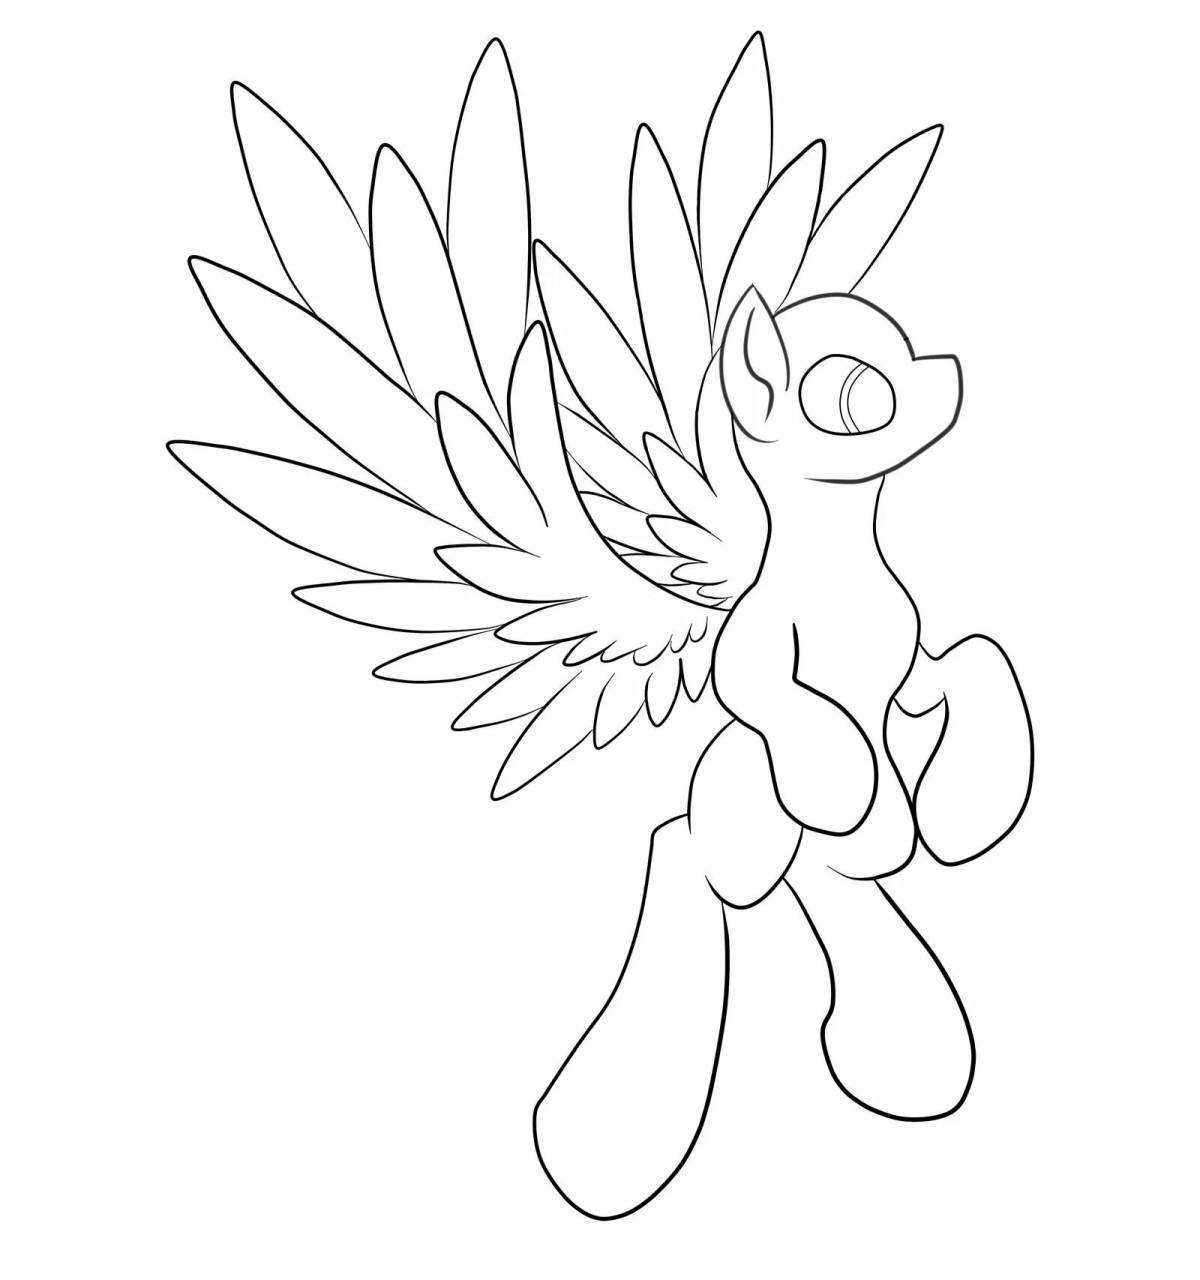 Fairy pony mannequin coloring page